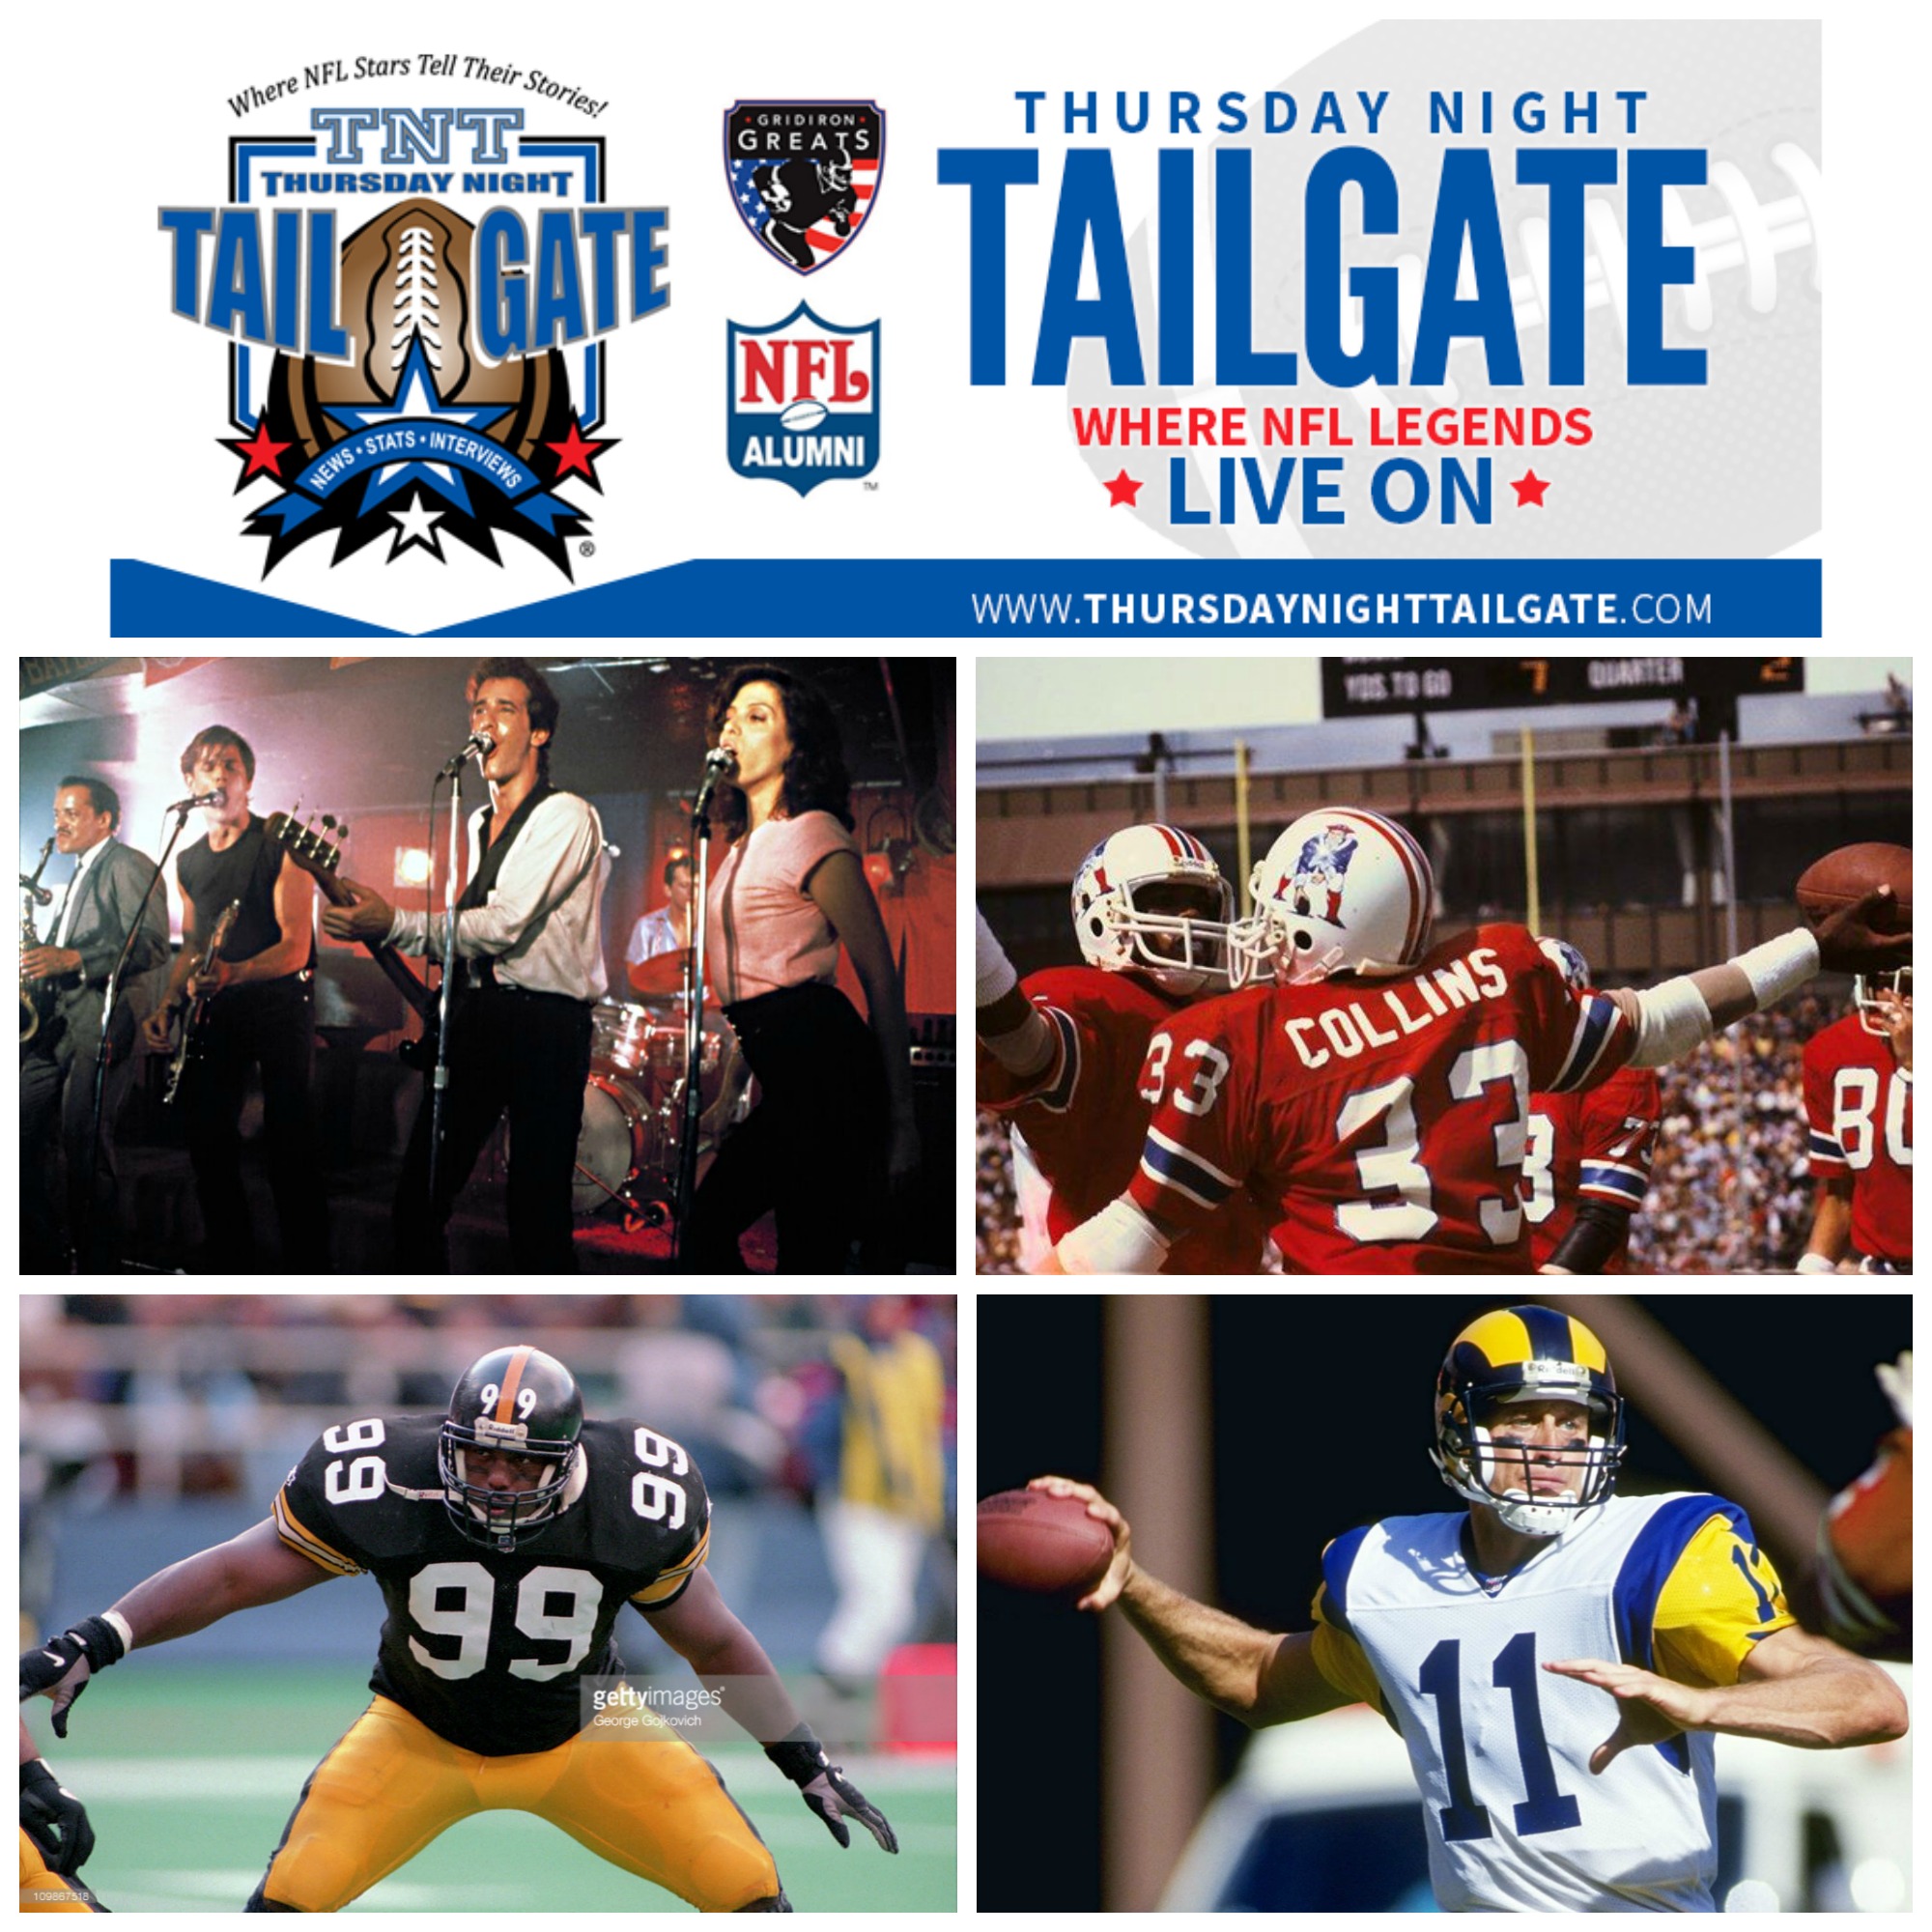 Matthew Laurance, Tony Collins, Levon Kirkland & Jim Everett Talked NFL Draft, Giants, Patriots, Steelers, Rams and more on a Happy Birthday to Me Edition of Thursday Night Tailgate.